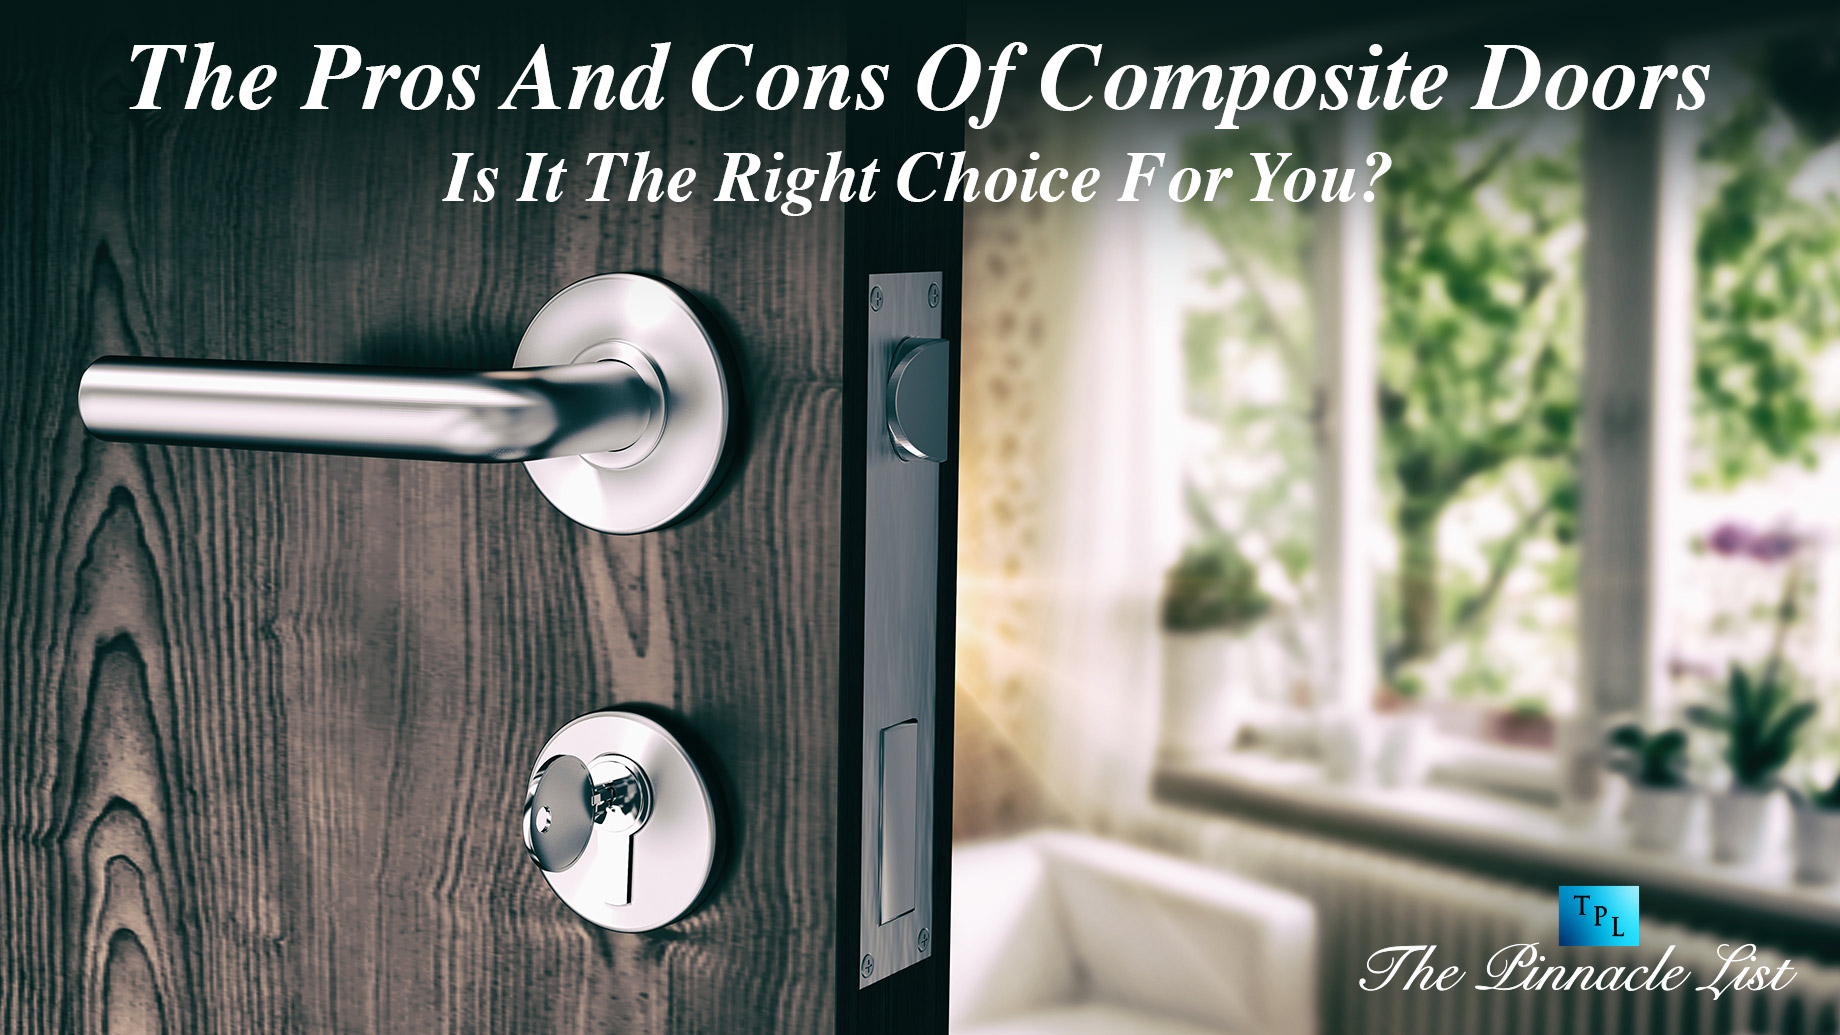 The Pros And Cons Of Composite Doors: Is It The Right Choice For You?